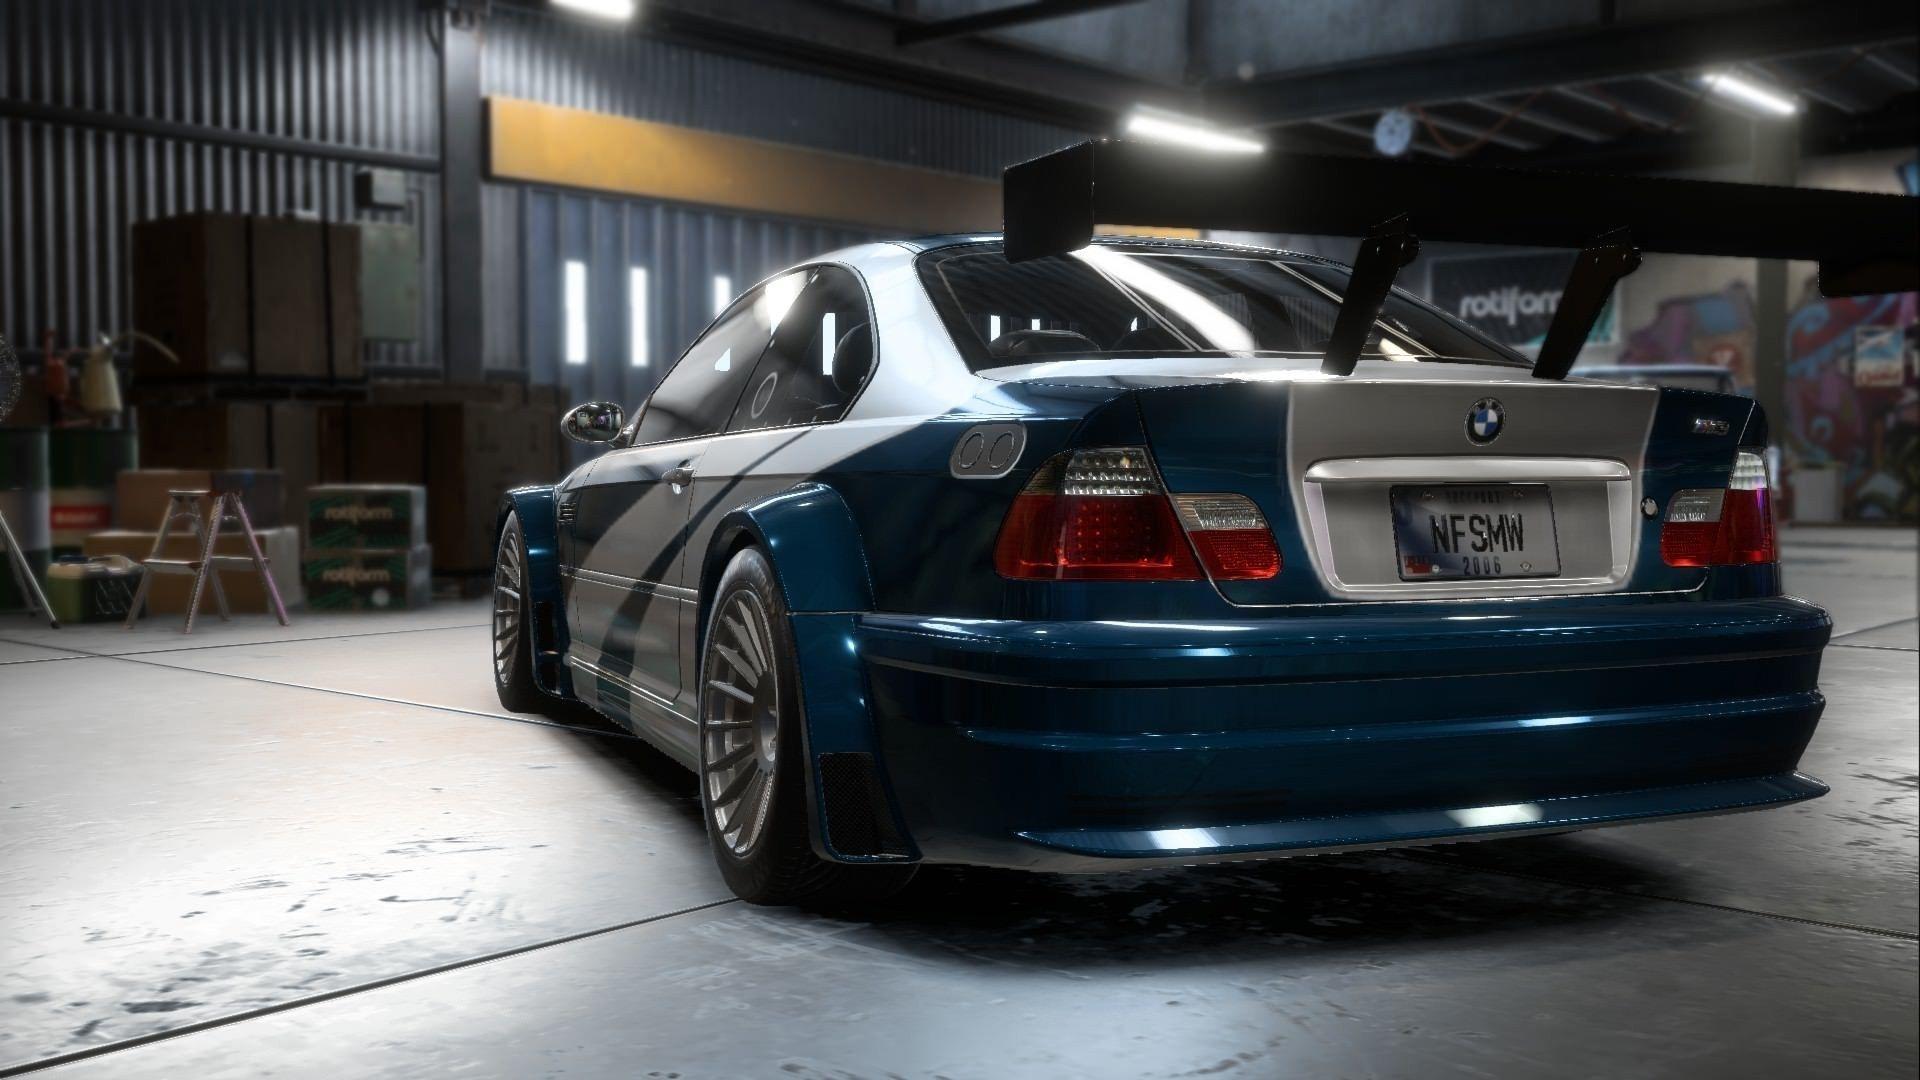 Bmw M3 Gtr Need For Speed Wallpaper